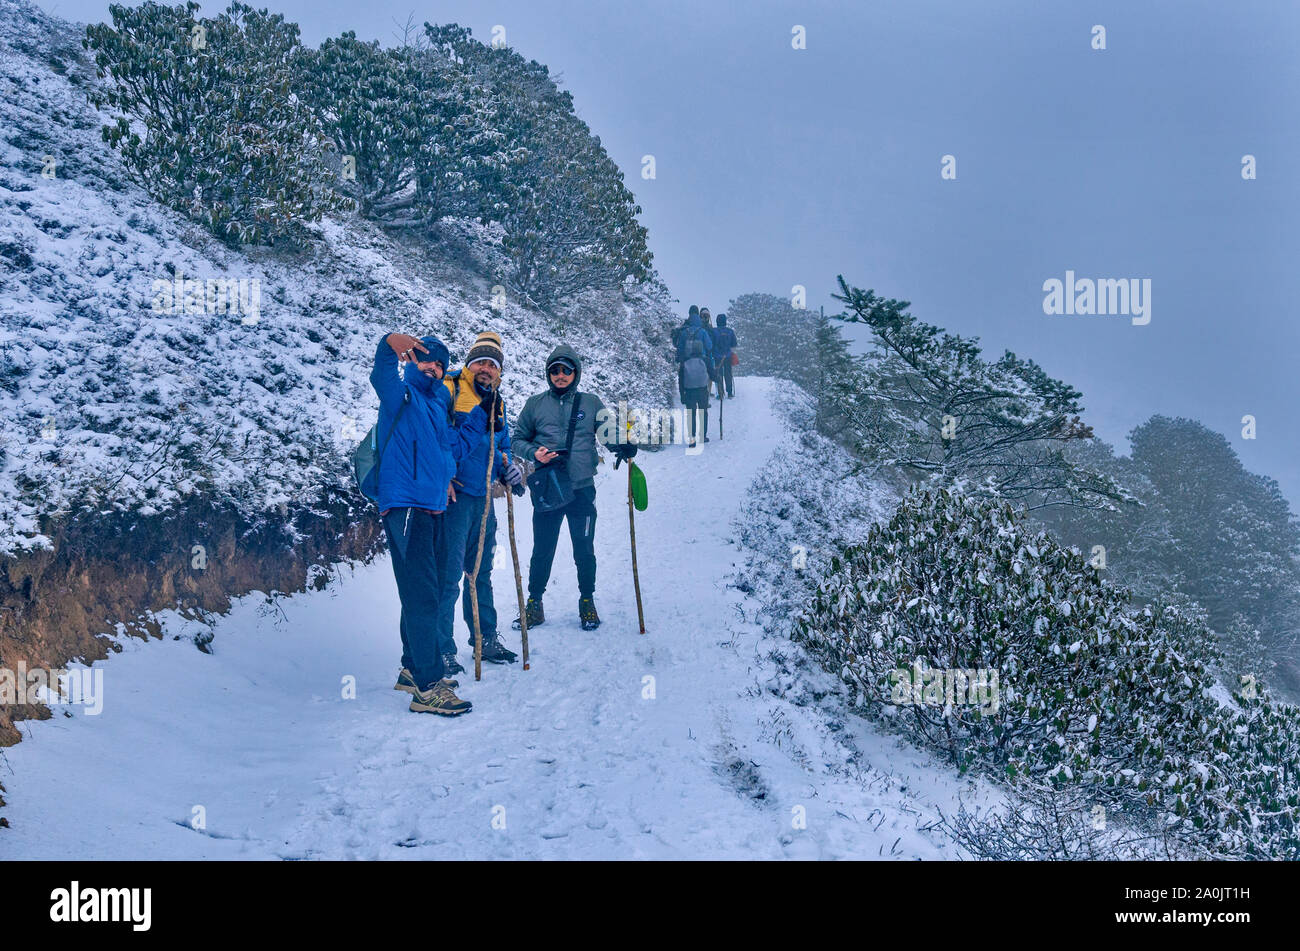 Hikers are taking selfie while walking through a snowy mountain trail. Stock Photo